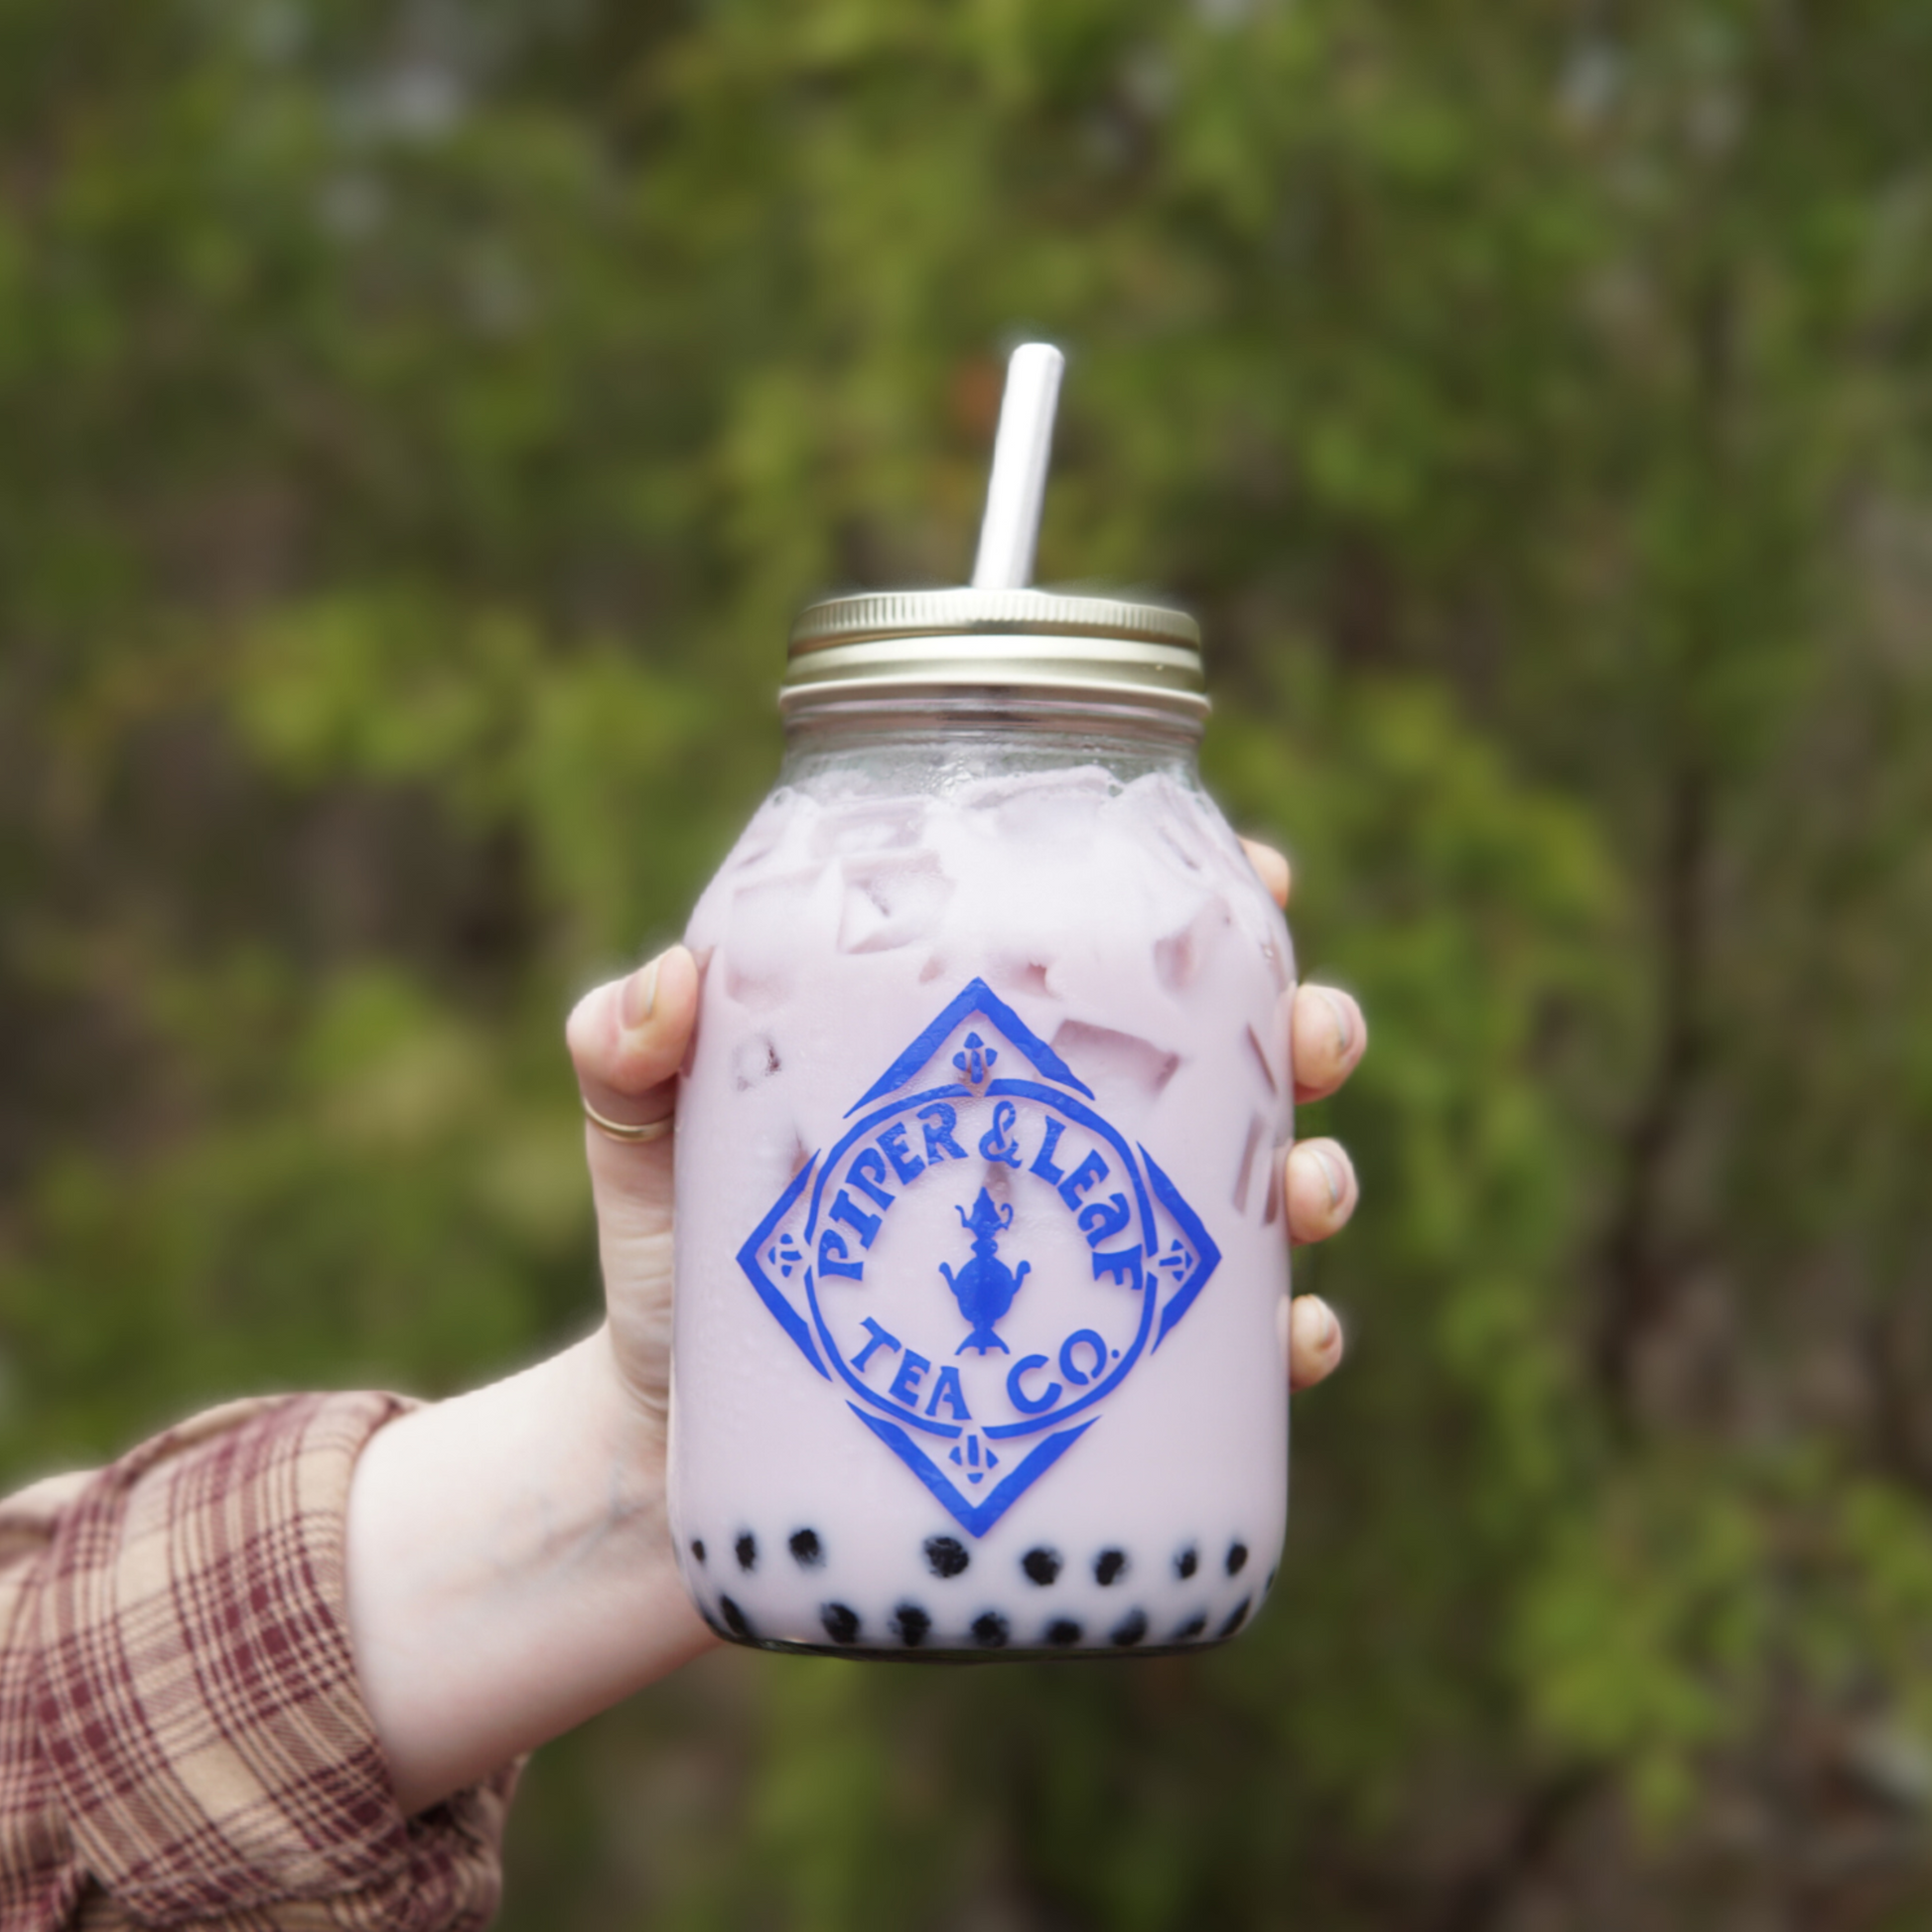 A person with holding a jar of Piper and Leaf Boba tea with a reusable metal straw